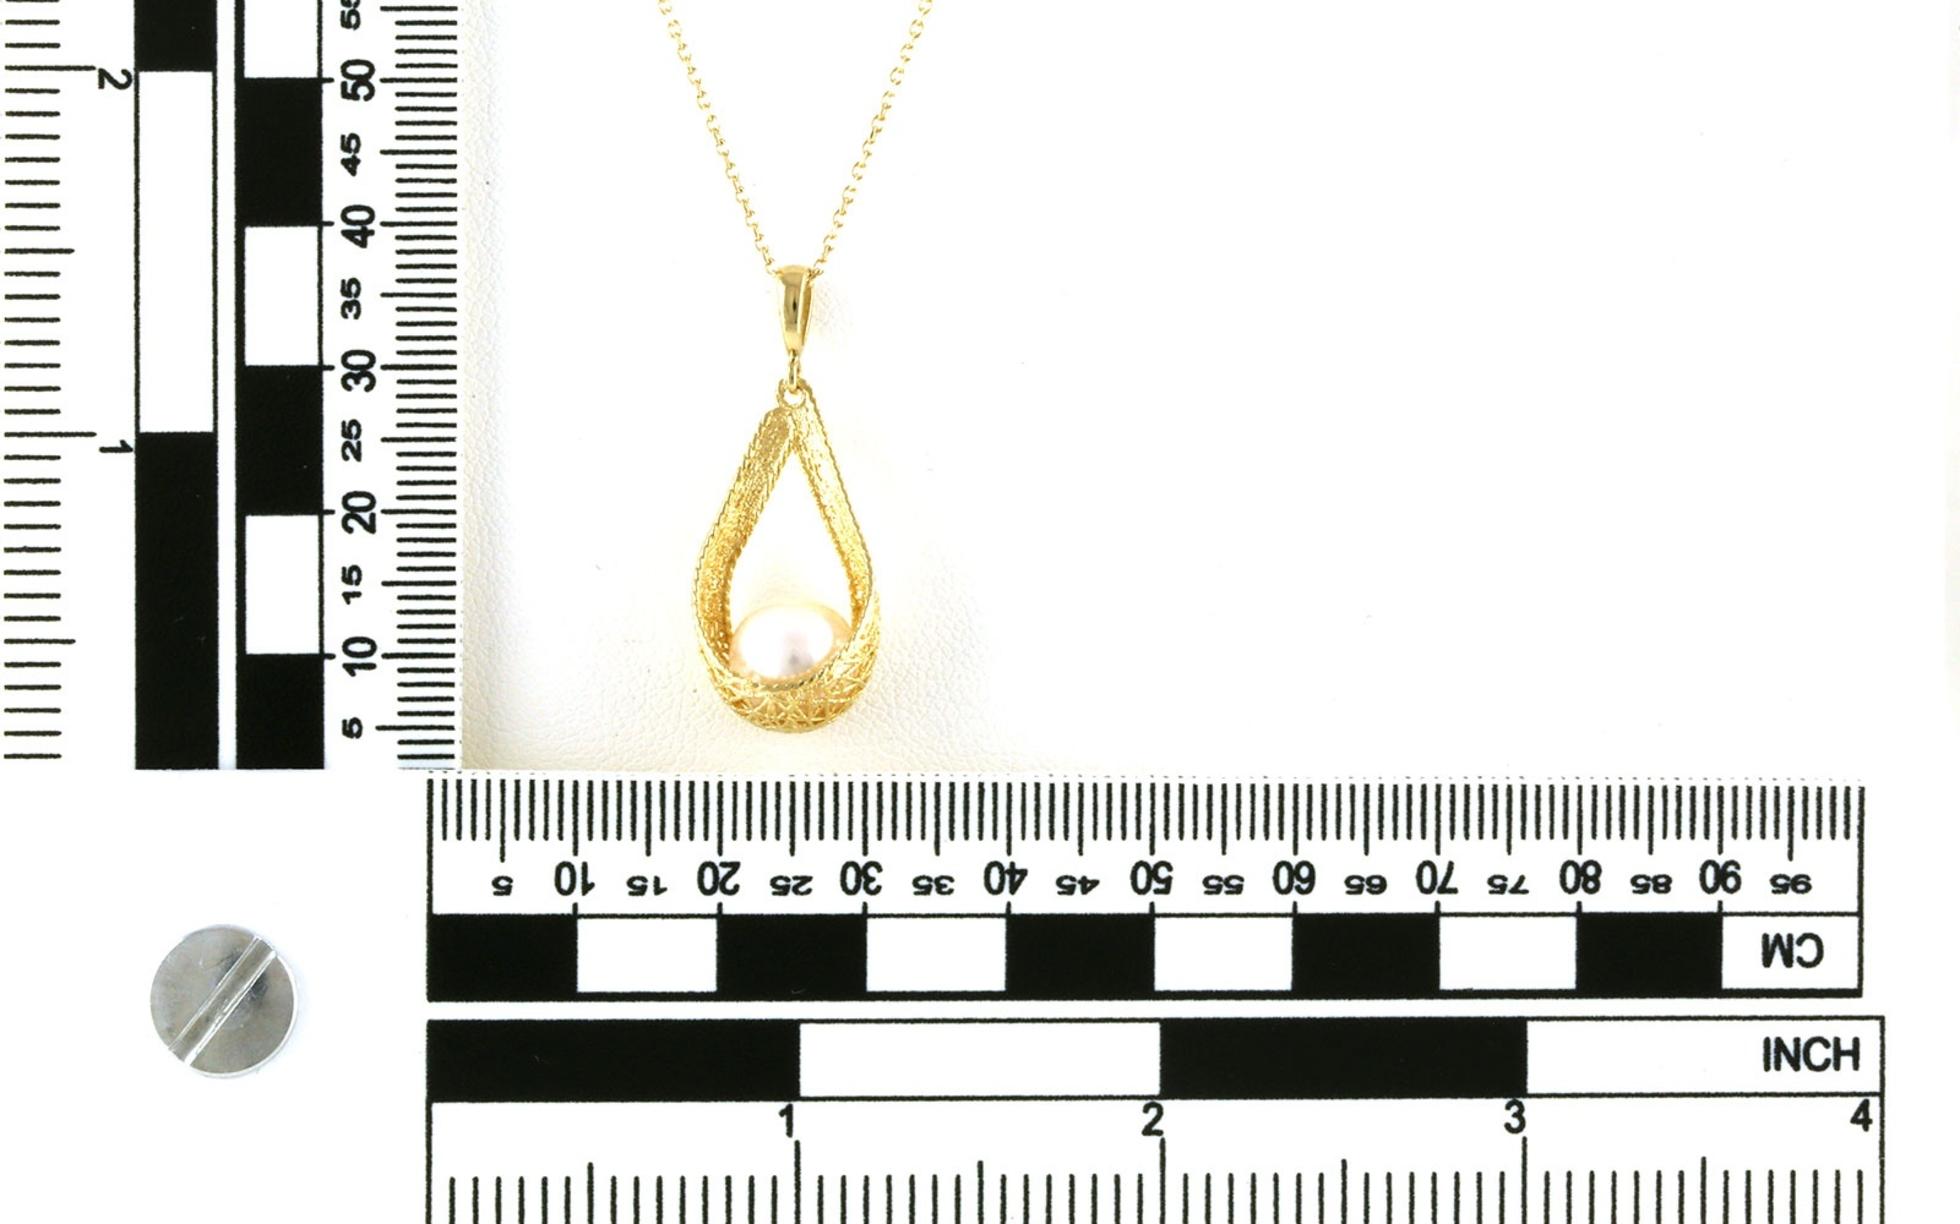 Woven Mesh Basket Solitaire Pearl Necklace in Yellow Gold scale